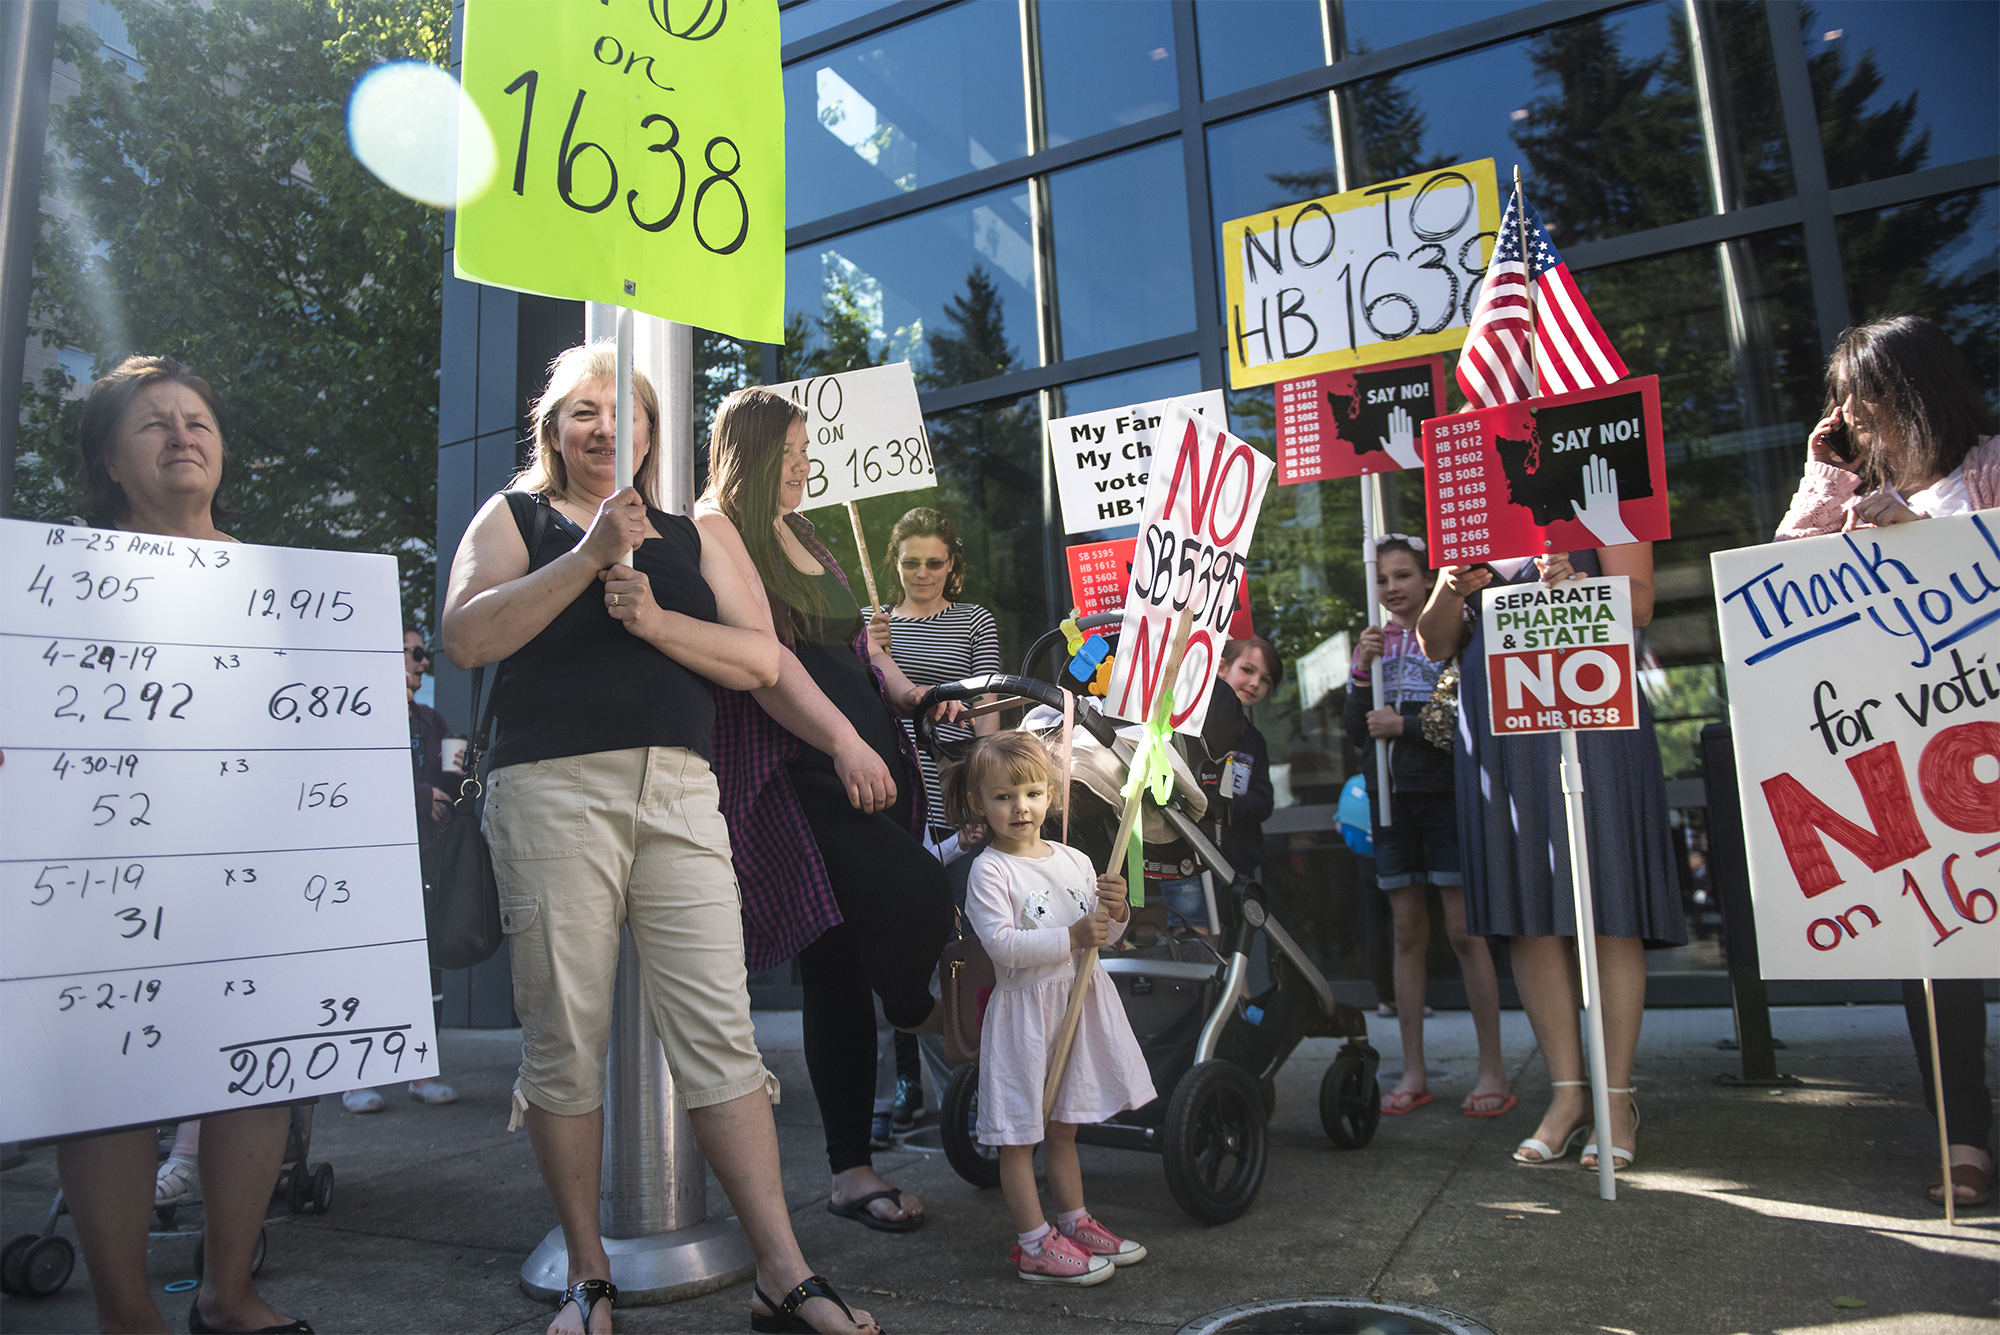 PHOTO: A group of anti-vaccine protesters gather in front of Vancouver City Hall prior to the signing of HB 1638 in Vancouver, Wash., on May 10, 2019.